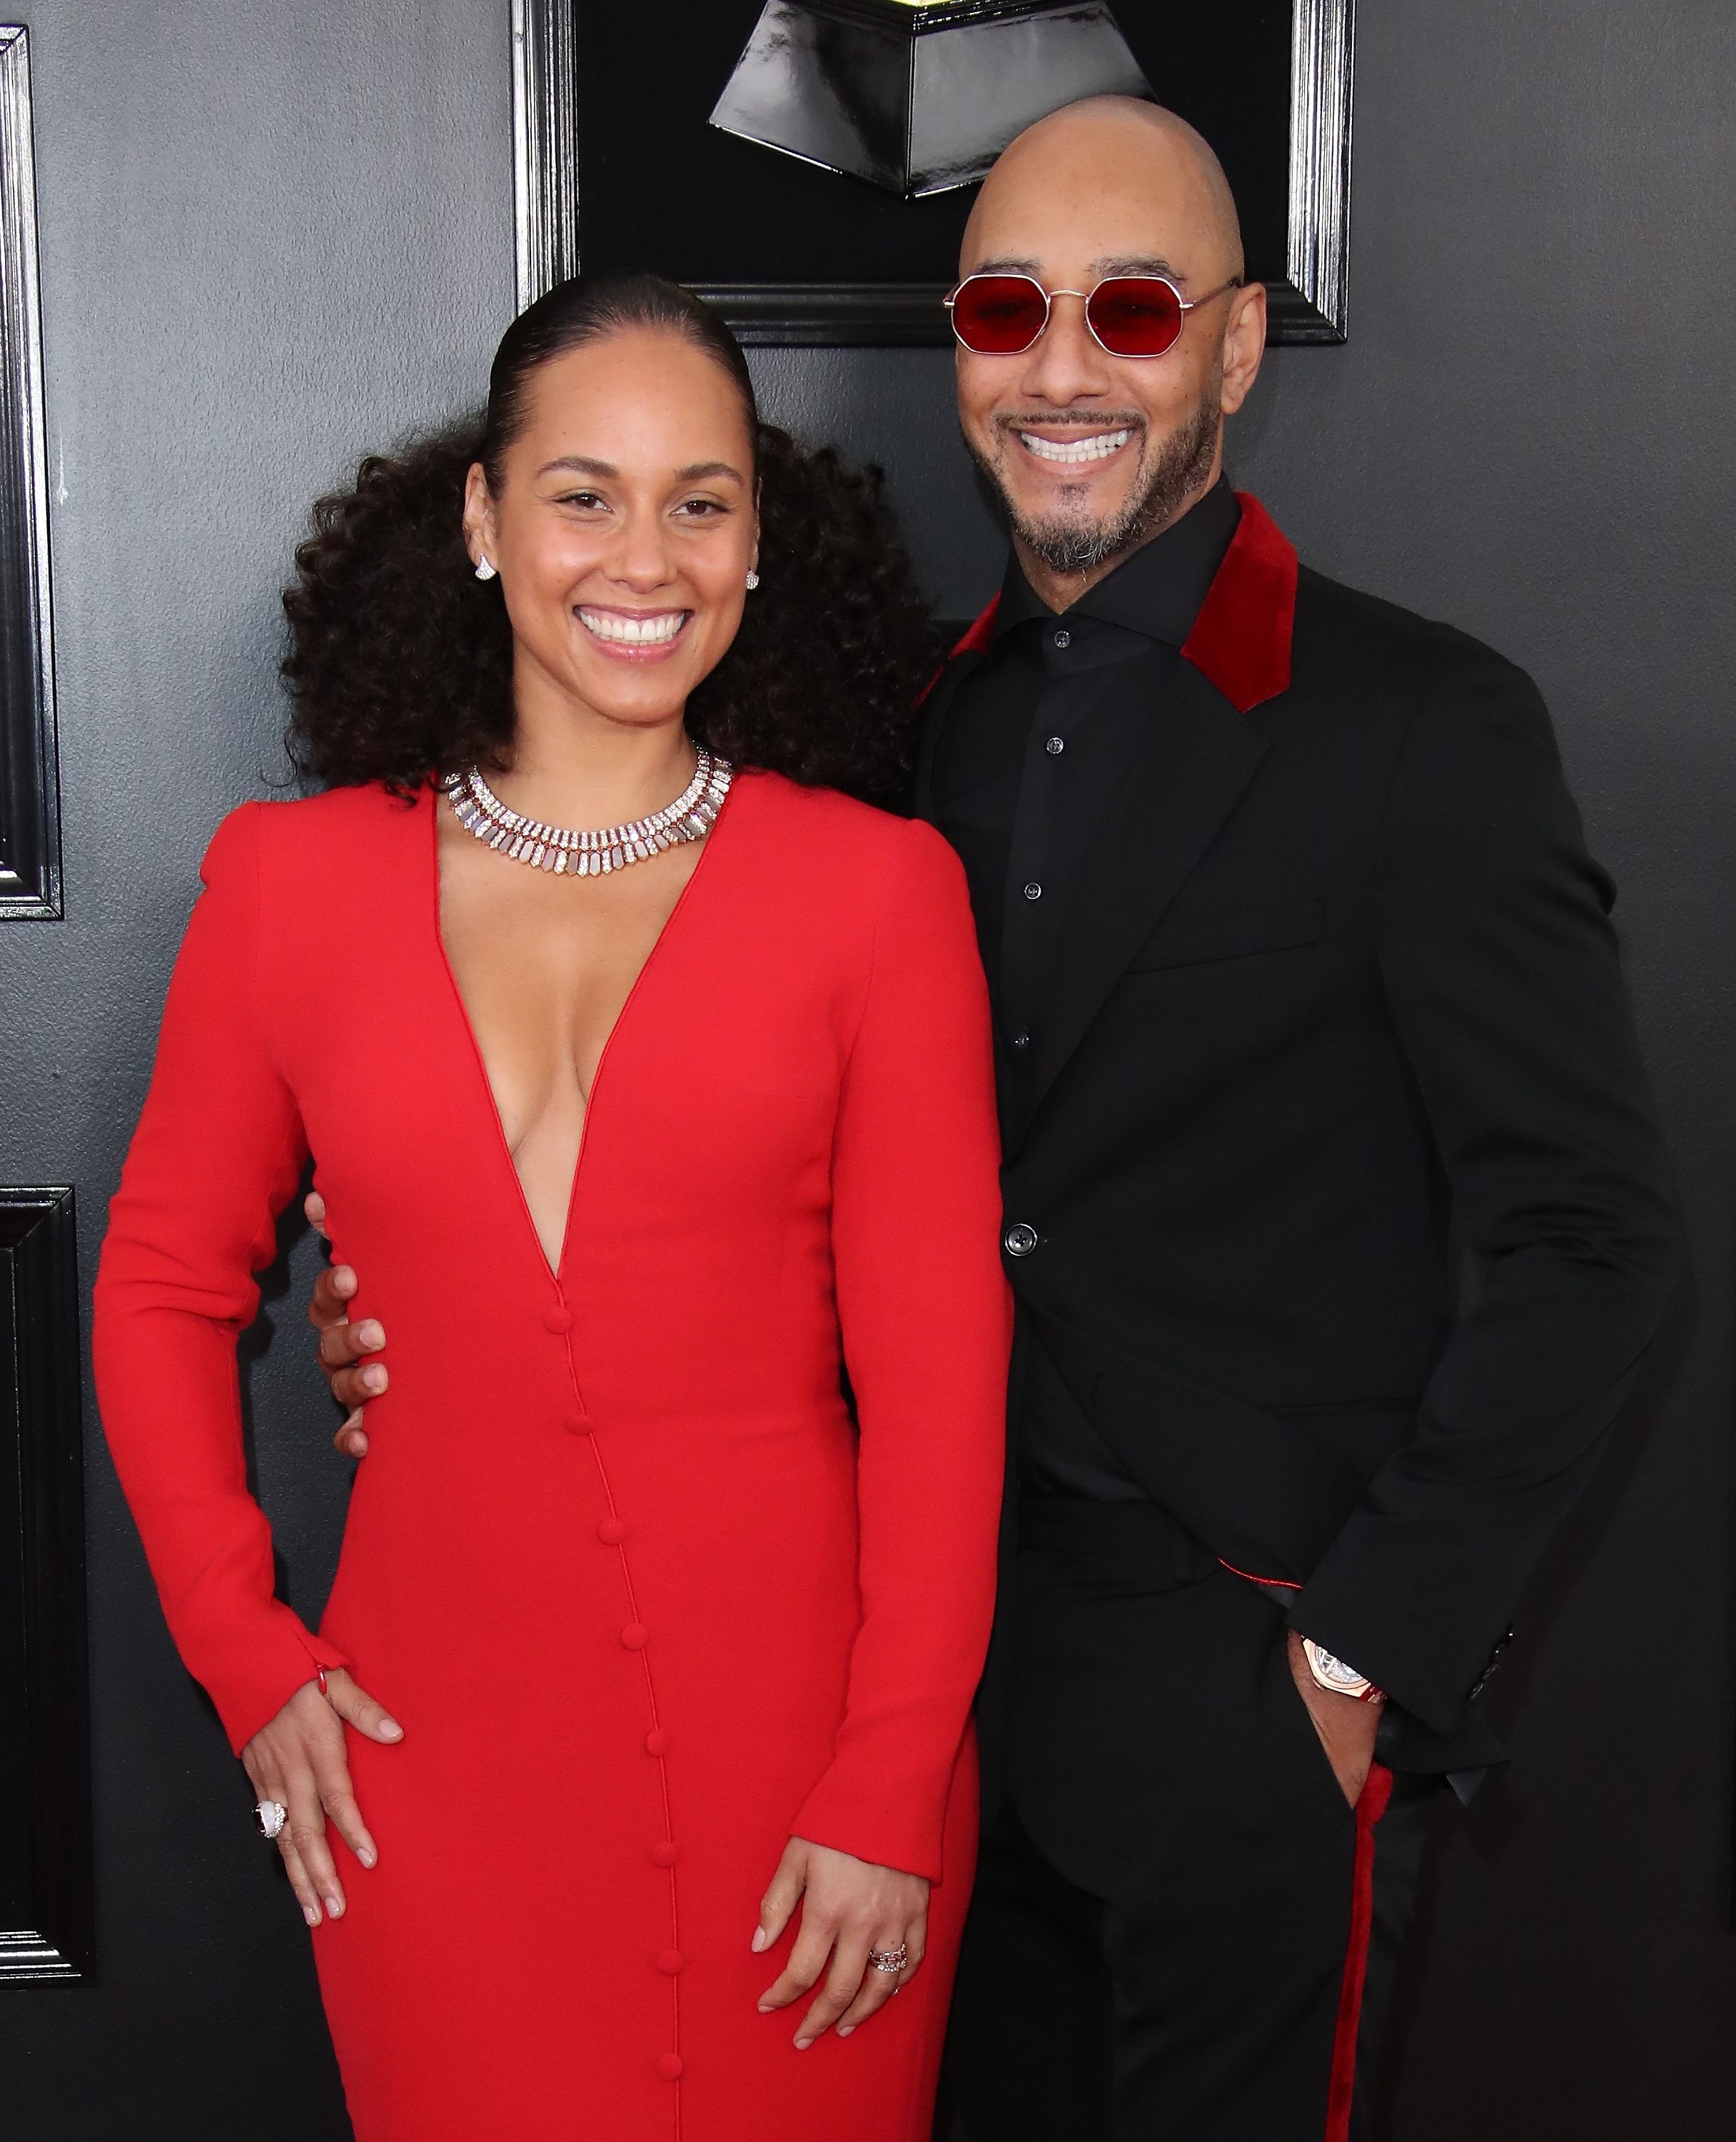 Alicia Keys and Swizz Beatz during the 61st Annual Grammy Awards at Staples Center on February 10, 2019 in Los Angeles, California. | Source: Getty Images